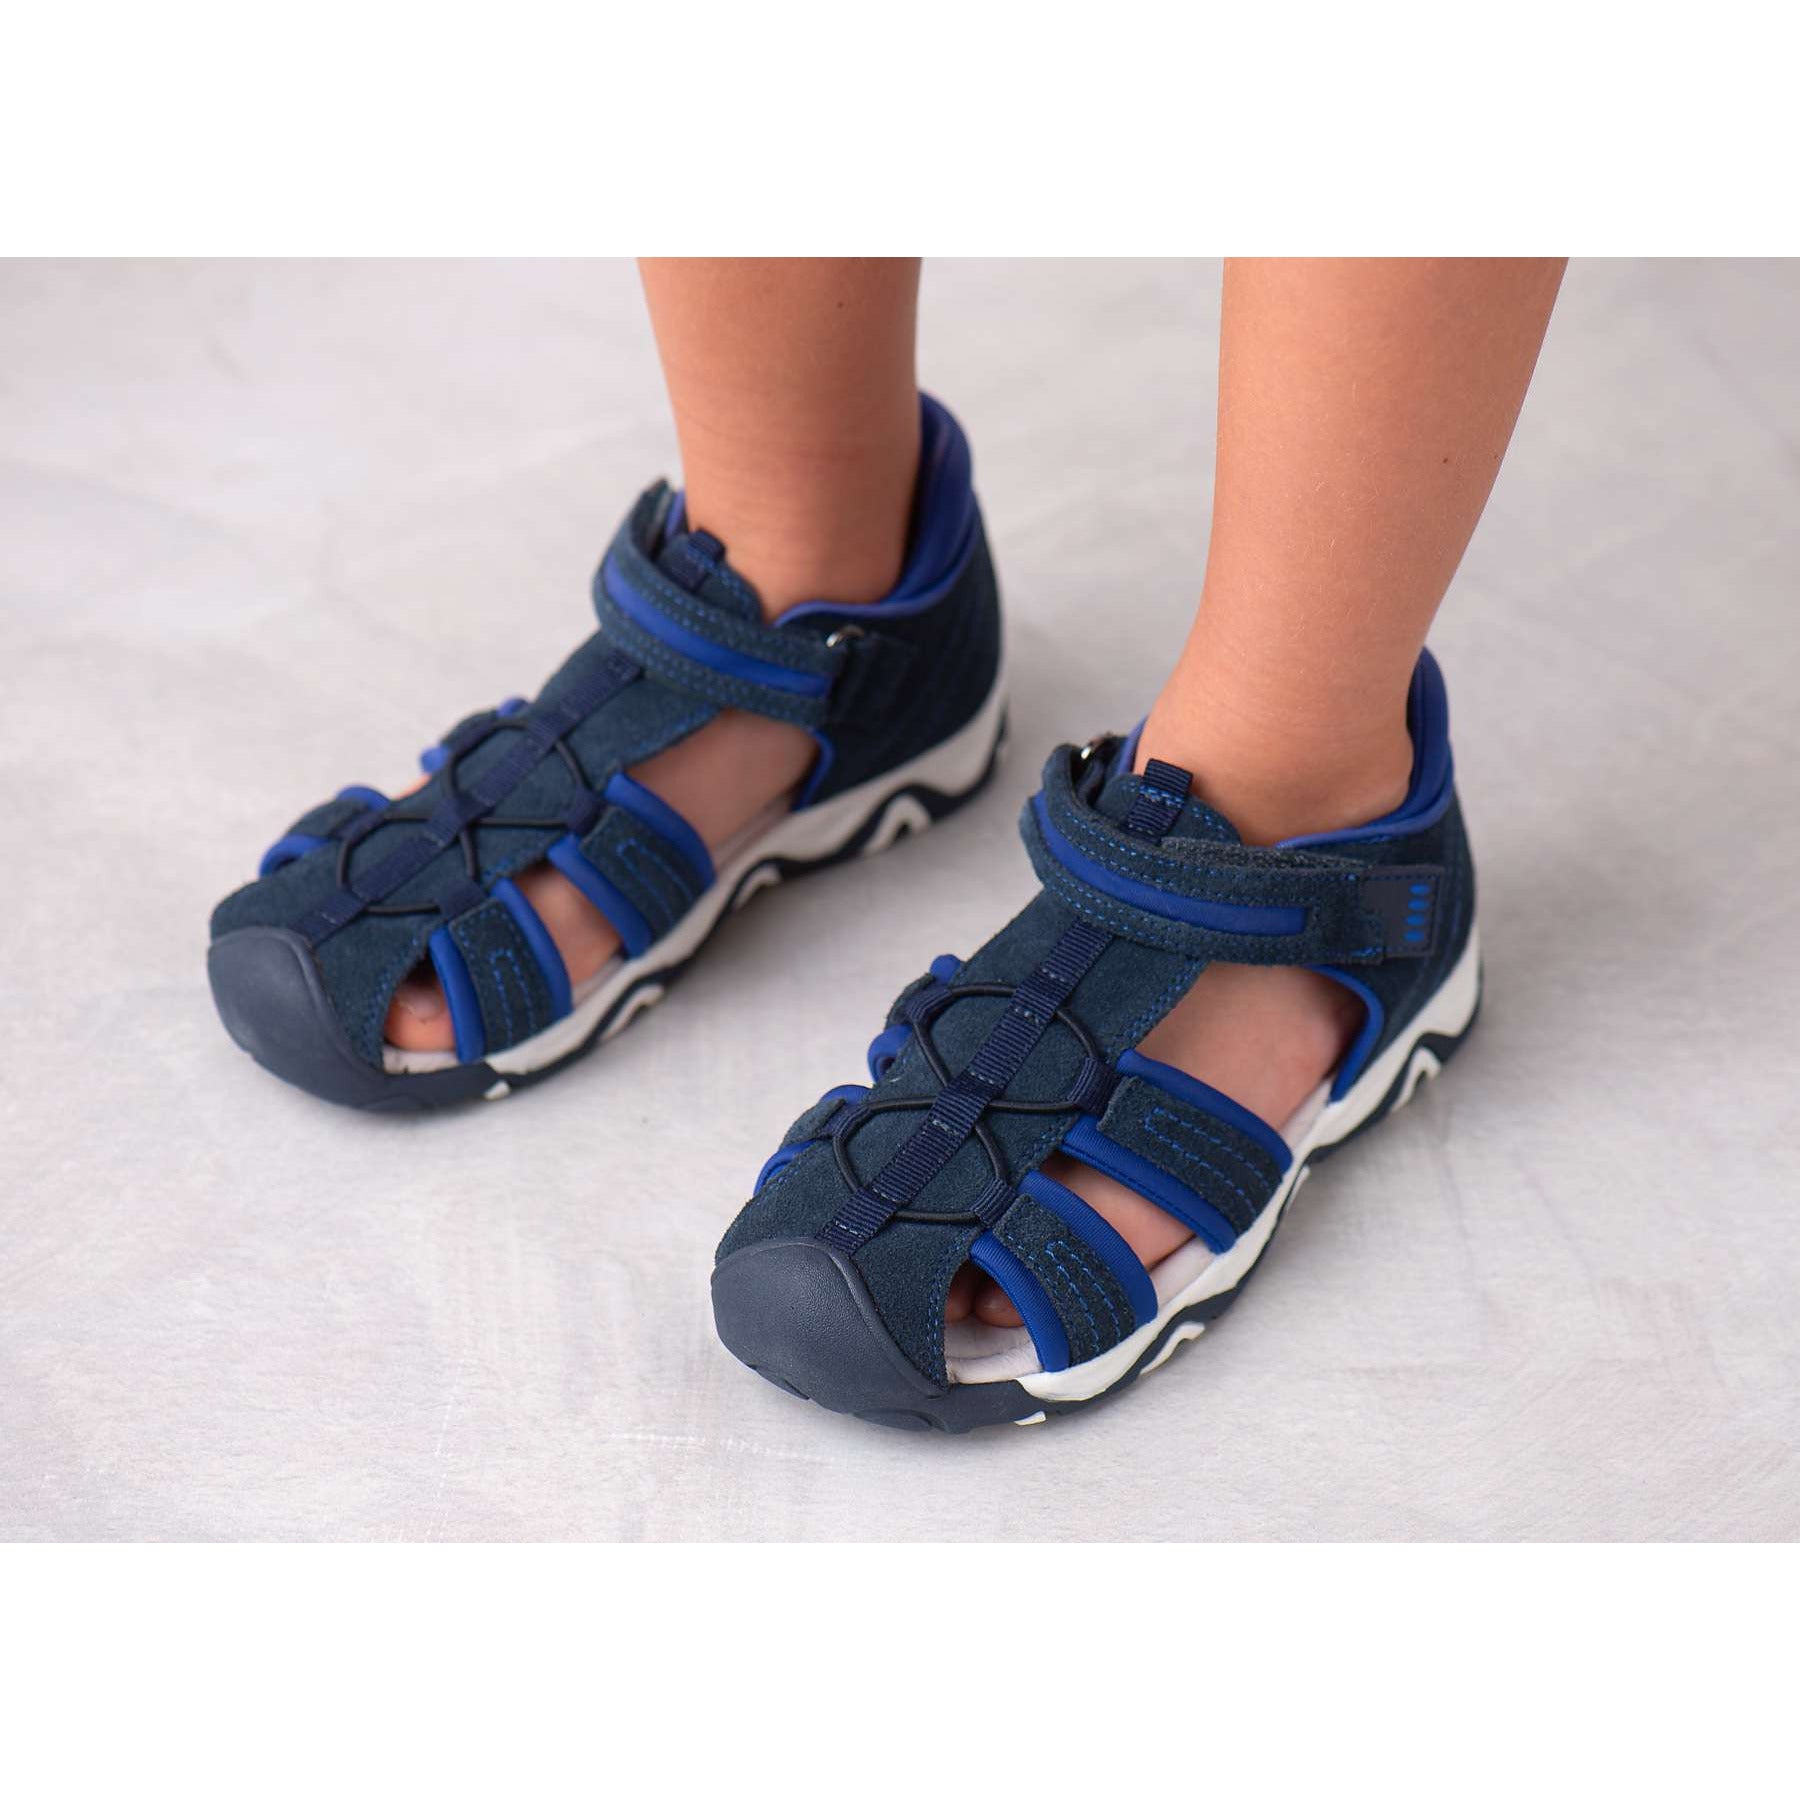 GERYS grey older boys arch support sandals - feelgoodshoes.ae